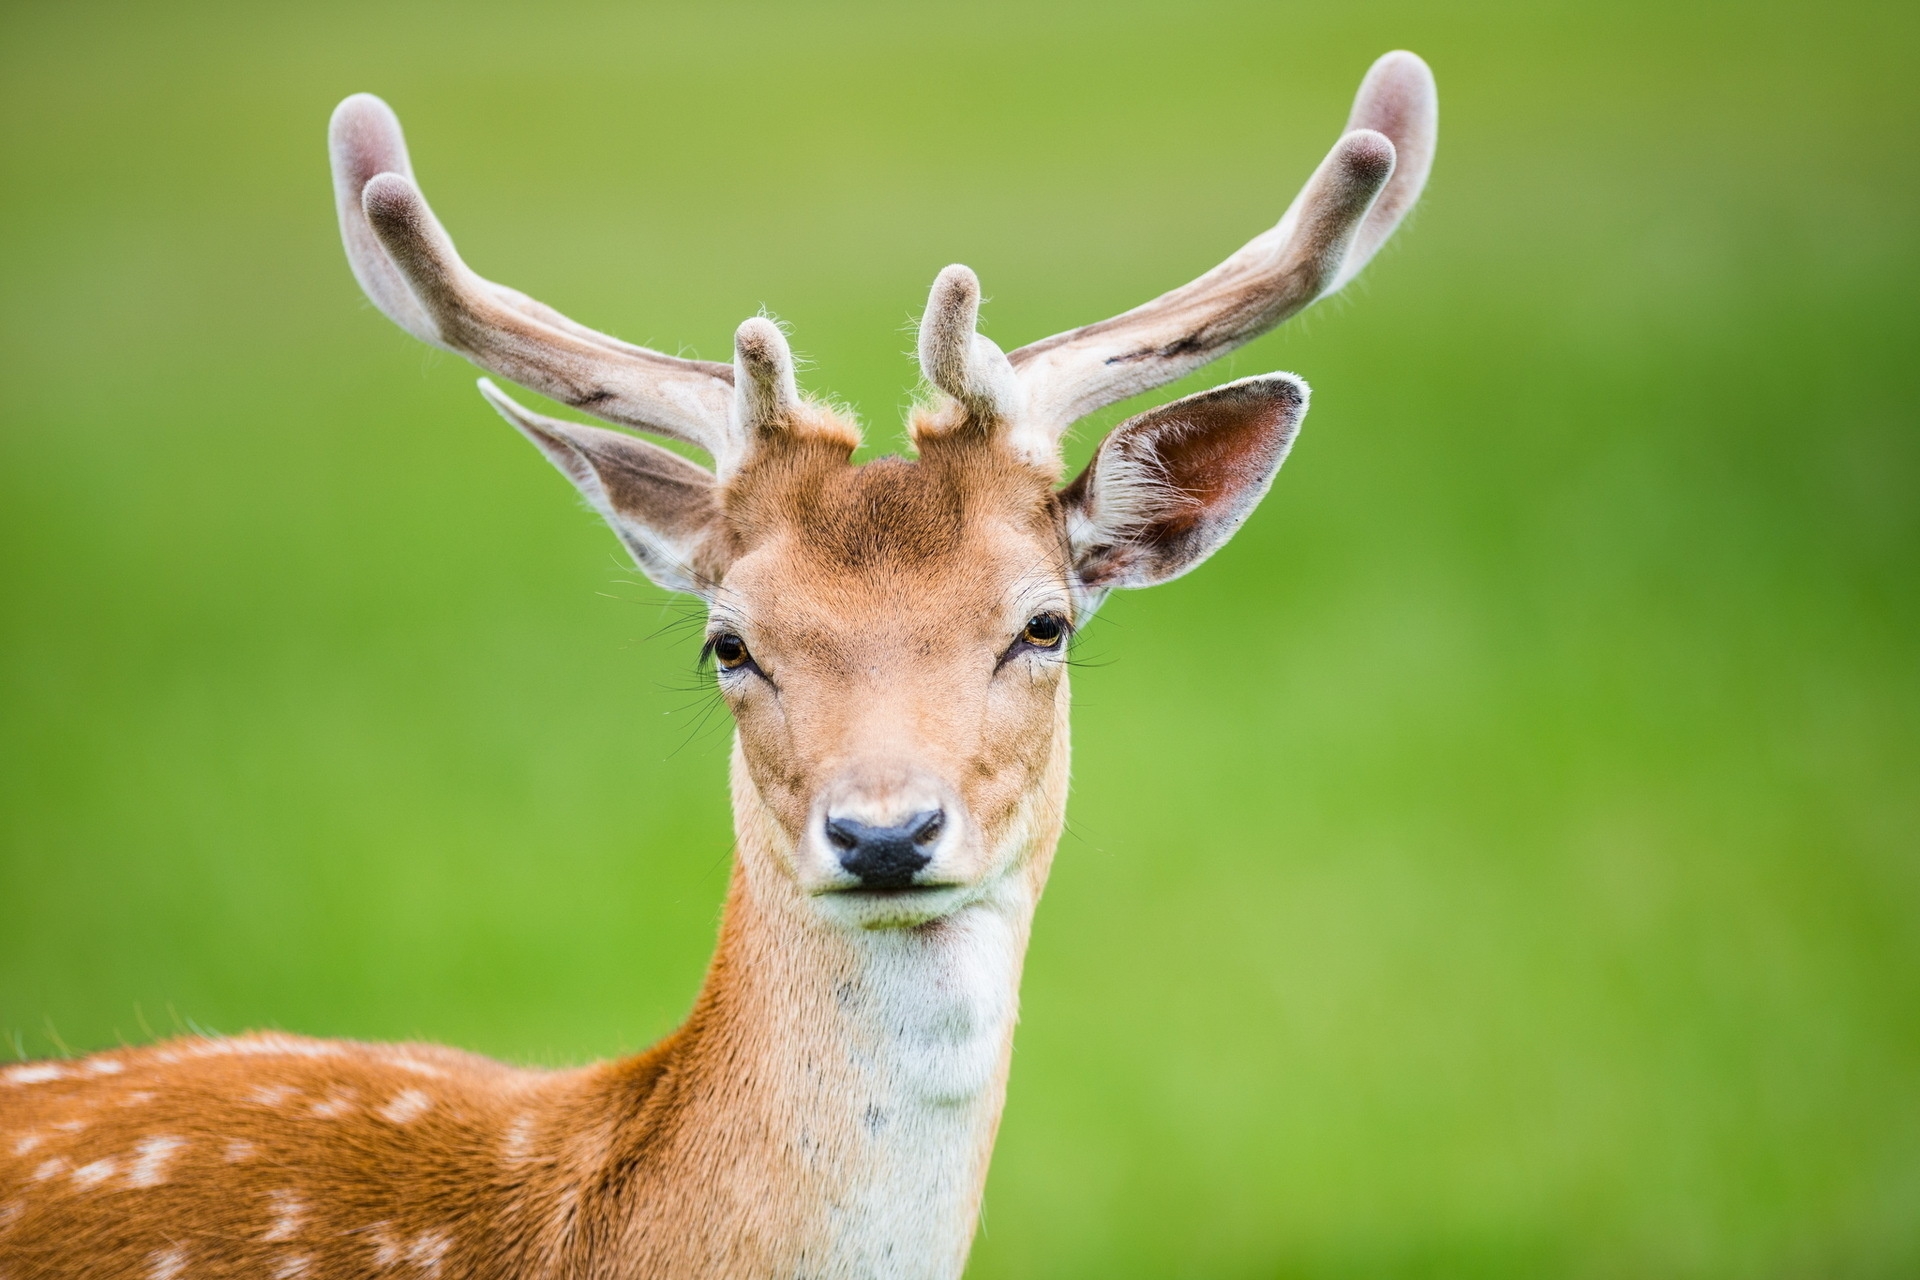 spotted, animals, spotty, deer, horns images